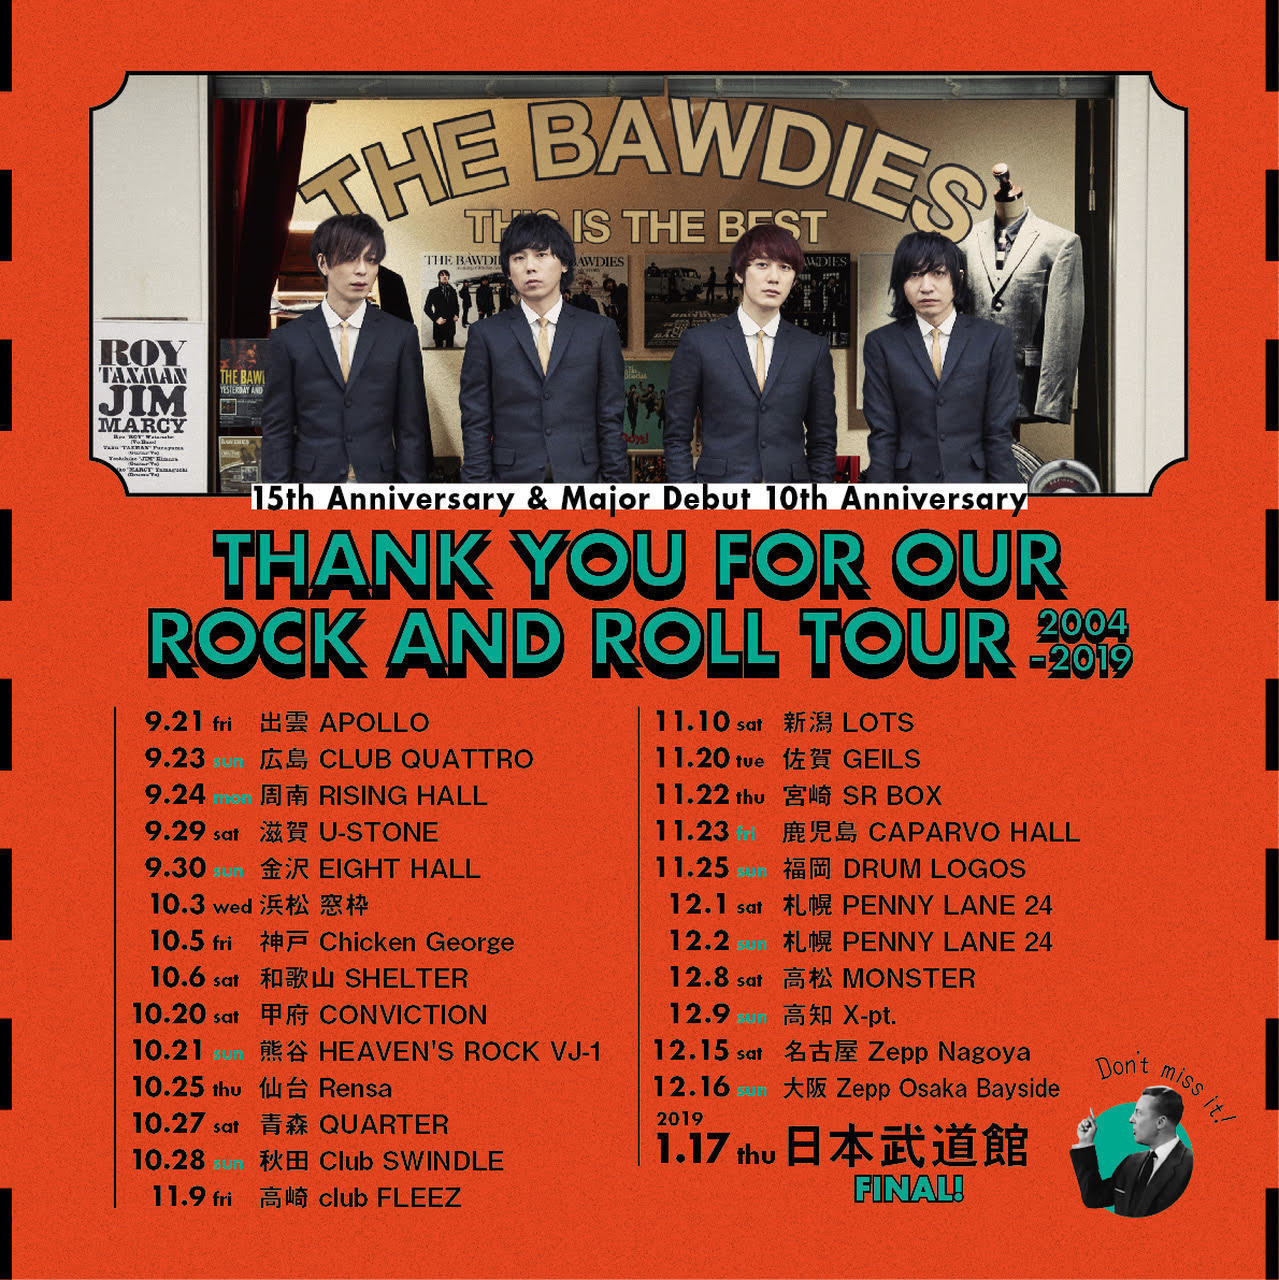 「Thank you for our Rock and Roll Tour 2004-2019」9月21日(金) 出雲 APOLLO～10月6日(土) 和歌山 SHELTERまでのチケット一般発売が開始！